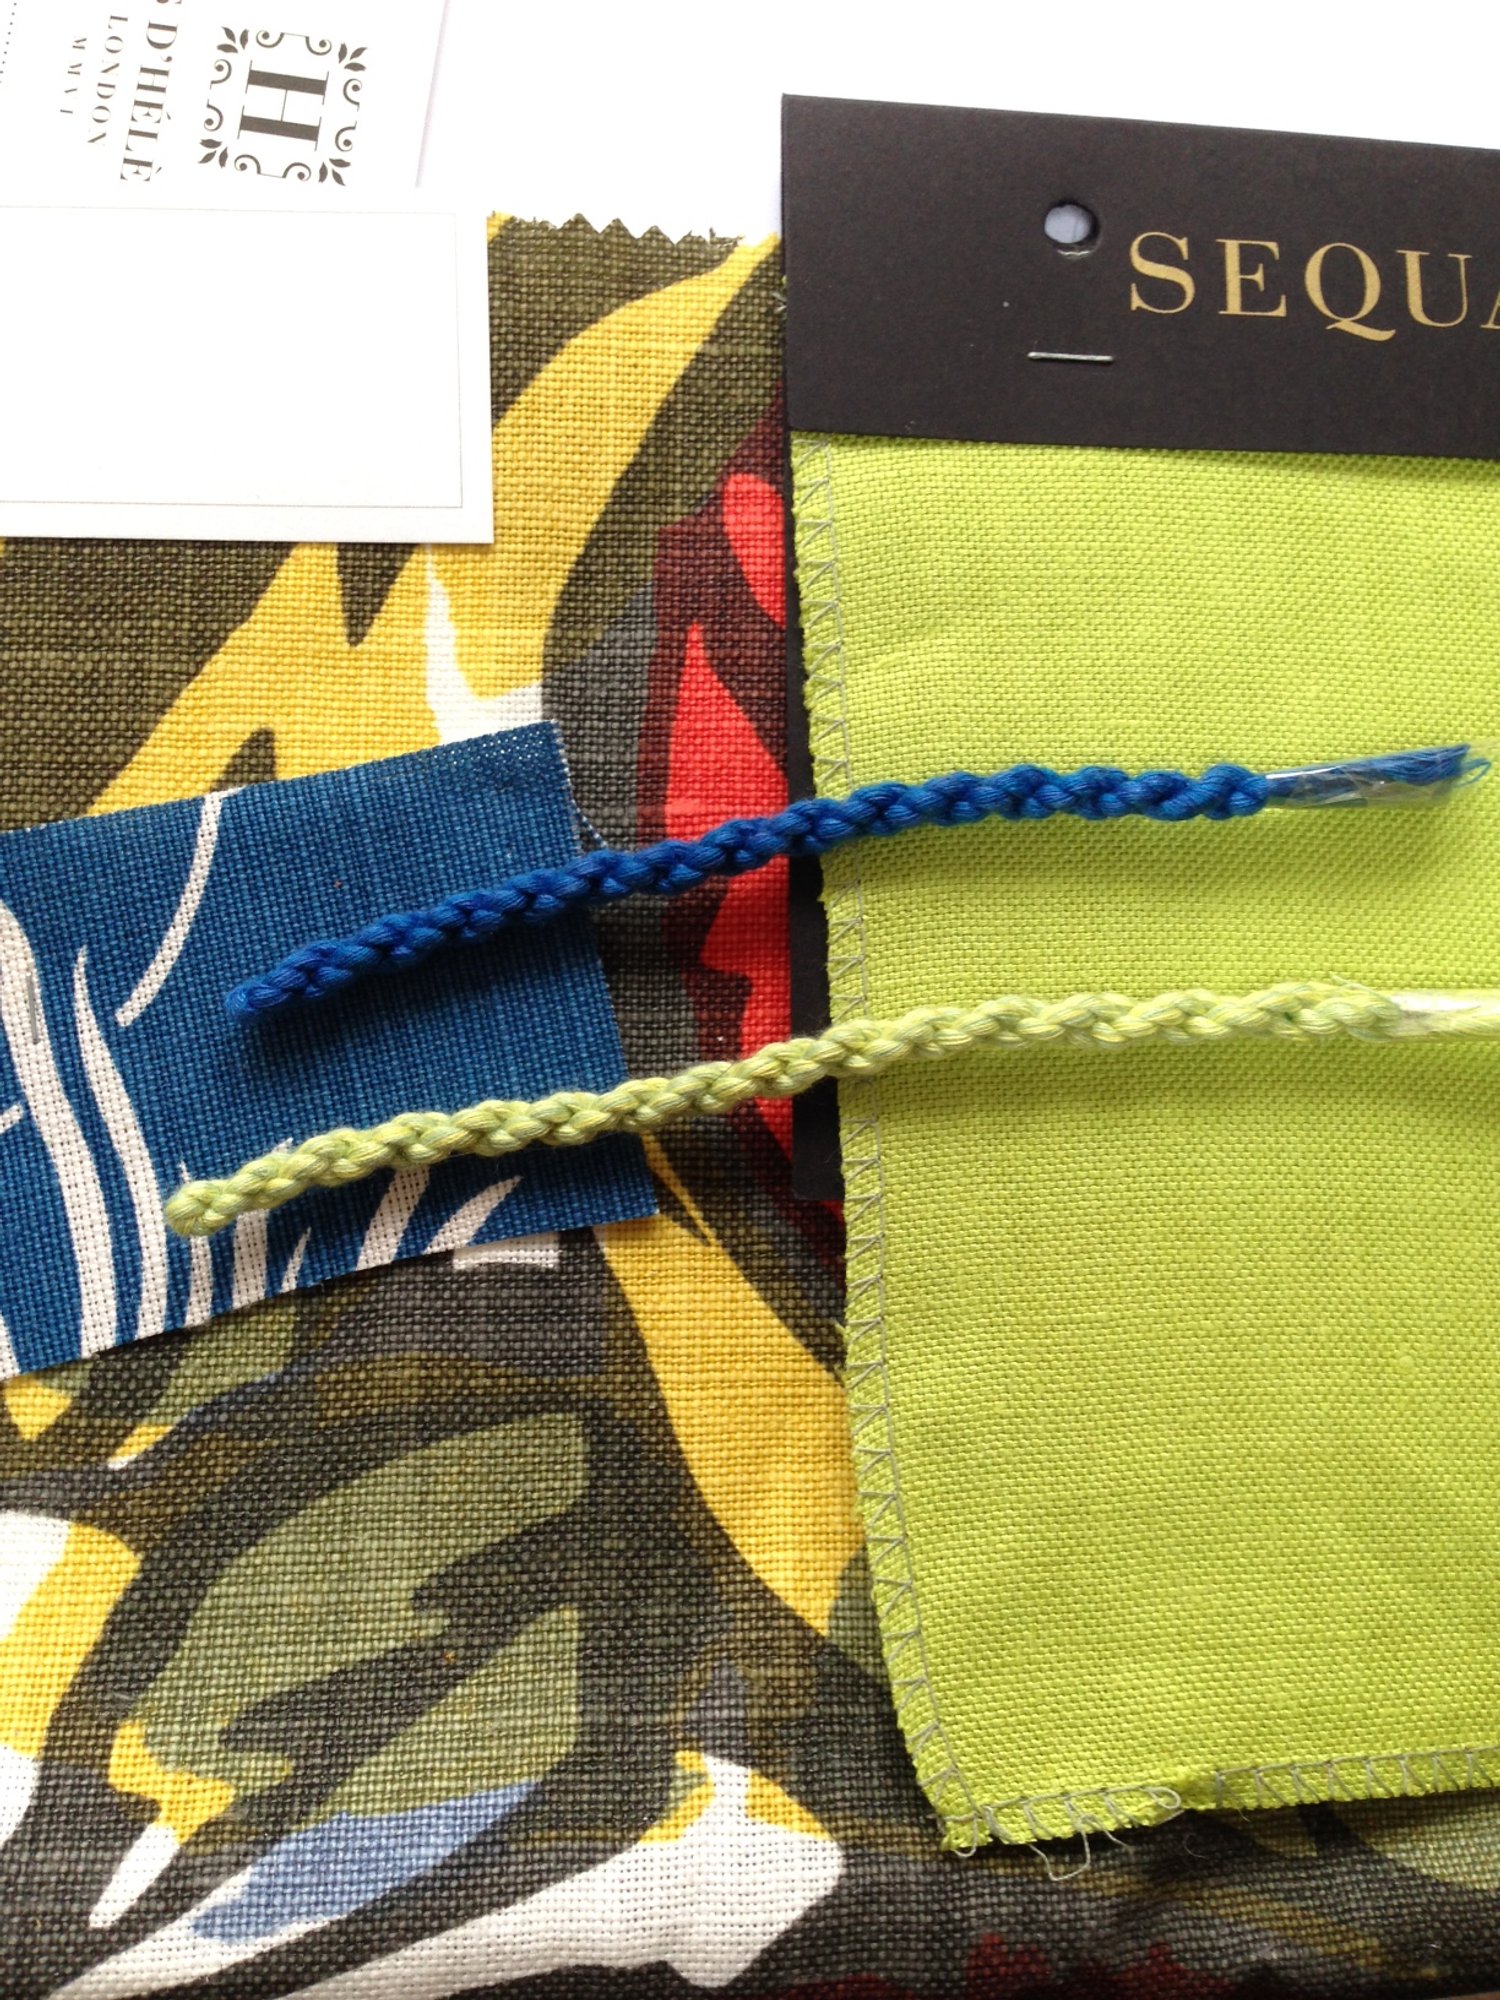 Colours for Riddic conc hoop with sequana fabric.JPG